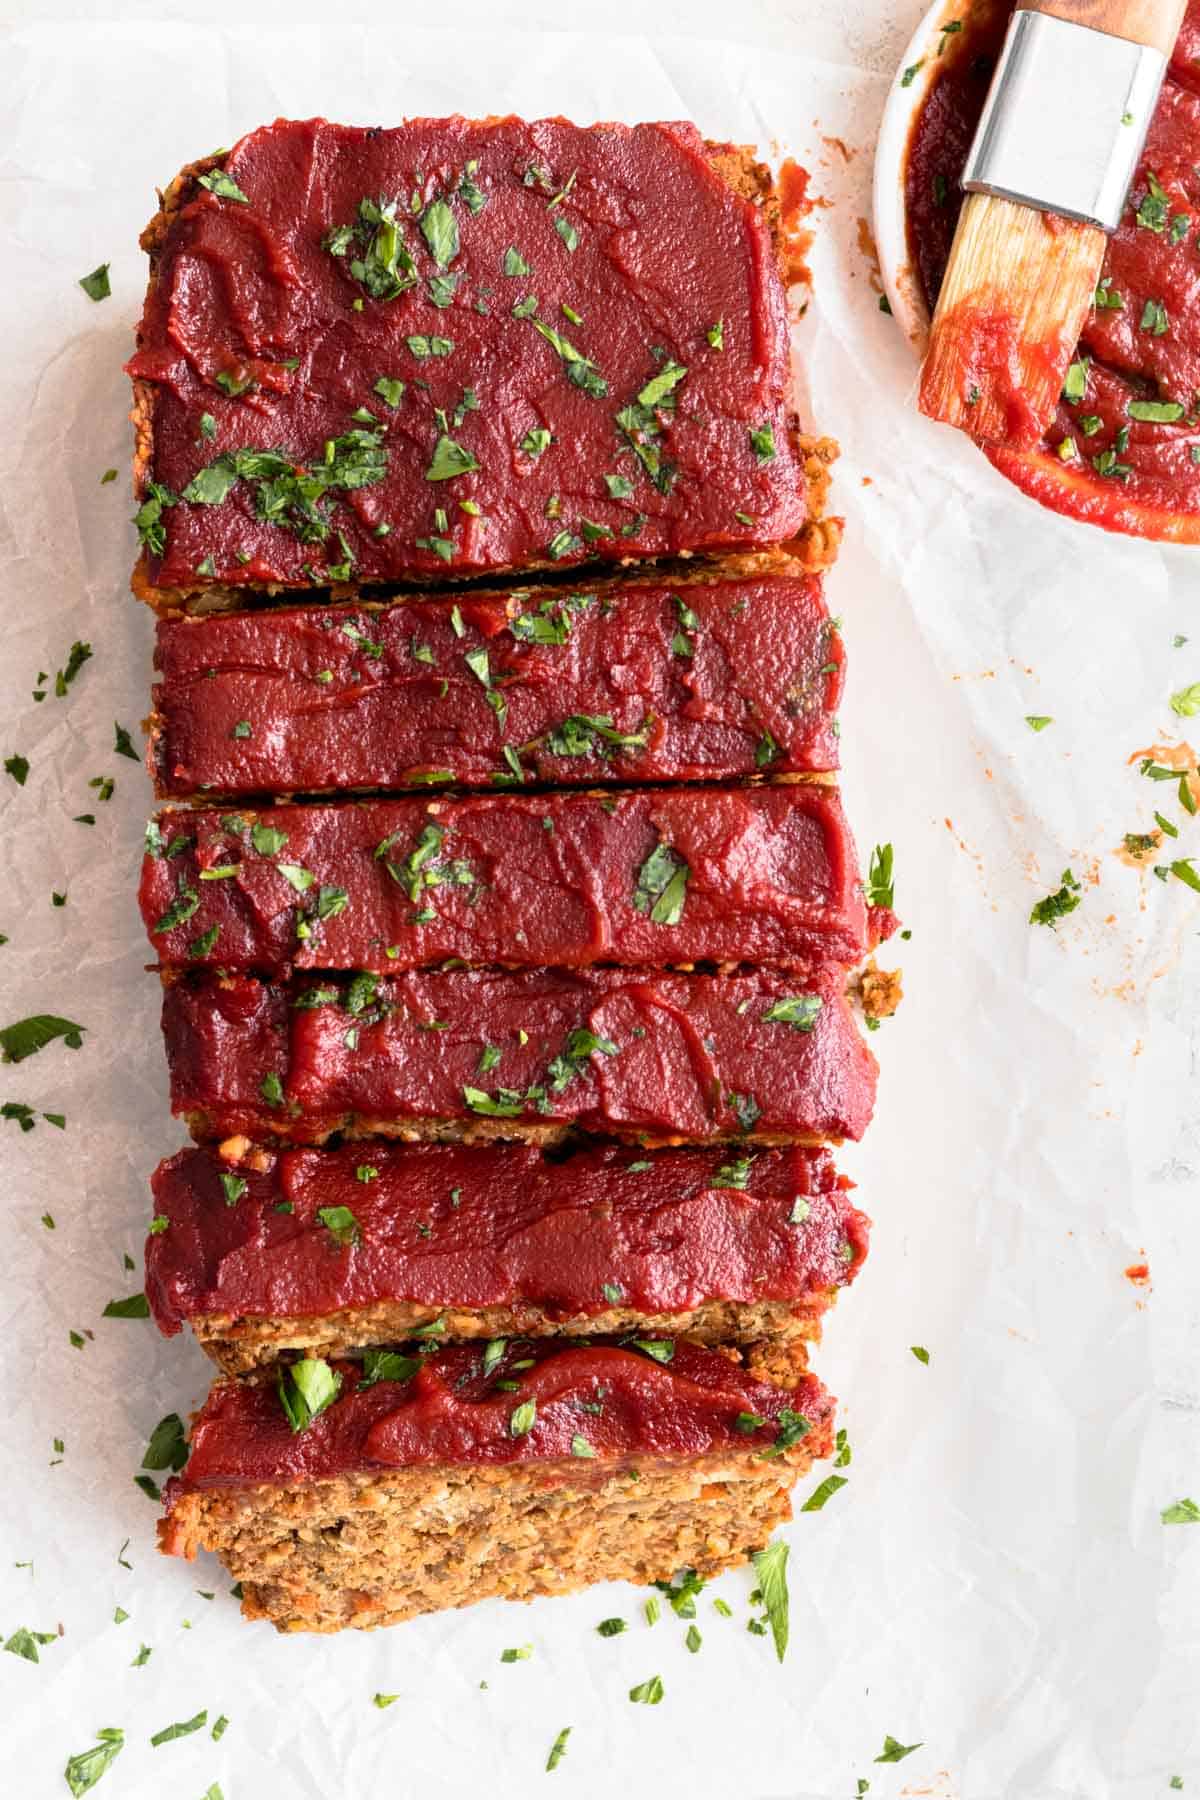 Sliced meatloaf on parchment paper and topped with parsley.